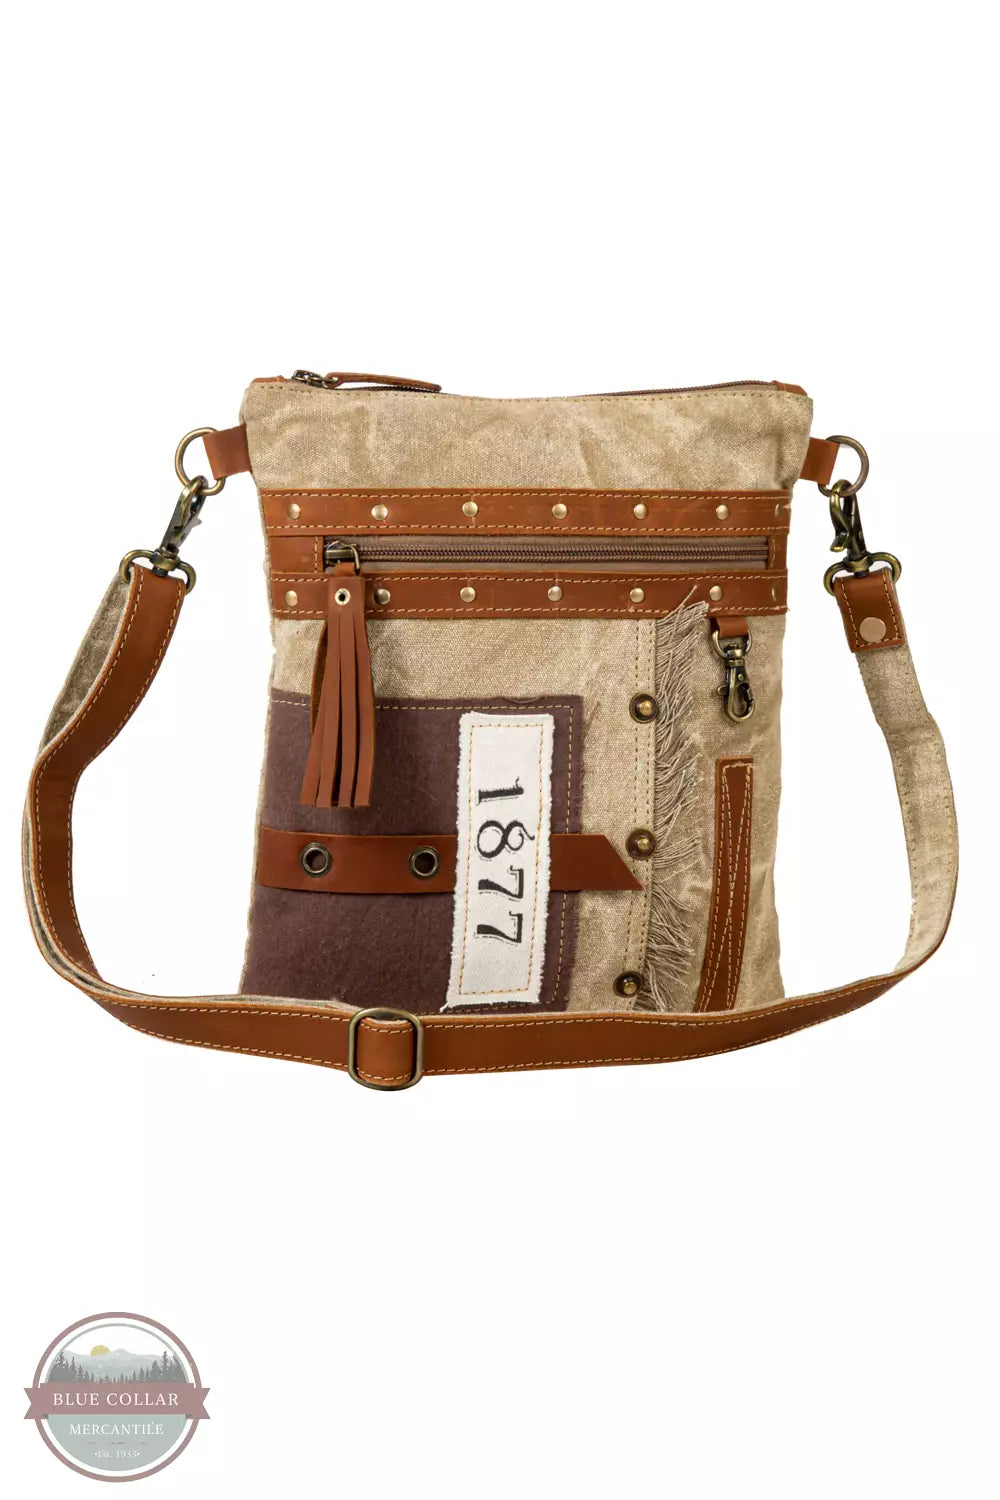 Myra Bag S-7958 Yesteryear Vintage Style Small Crossbody Bag Front View